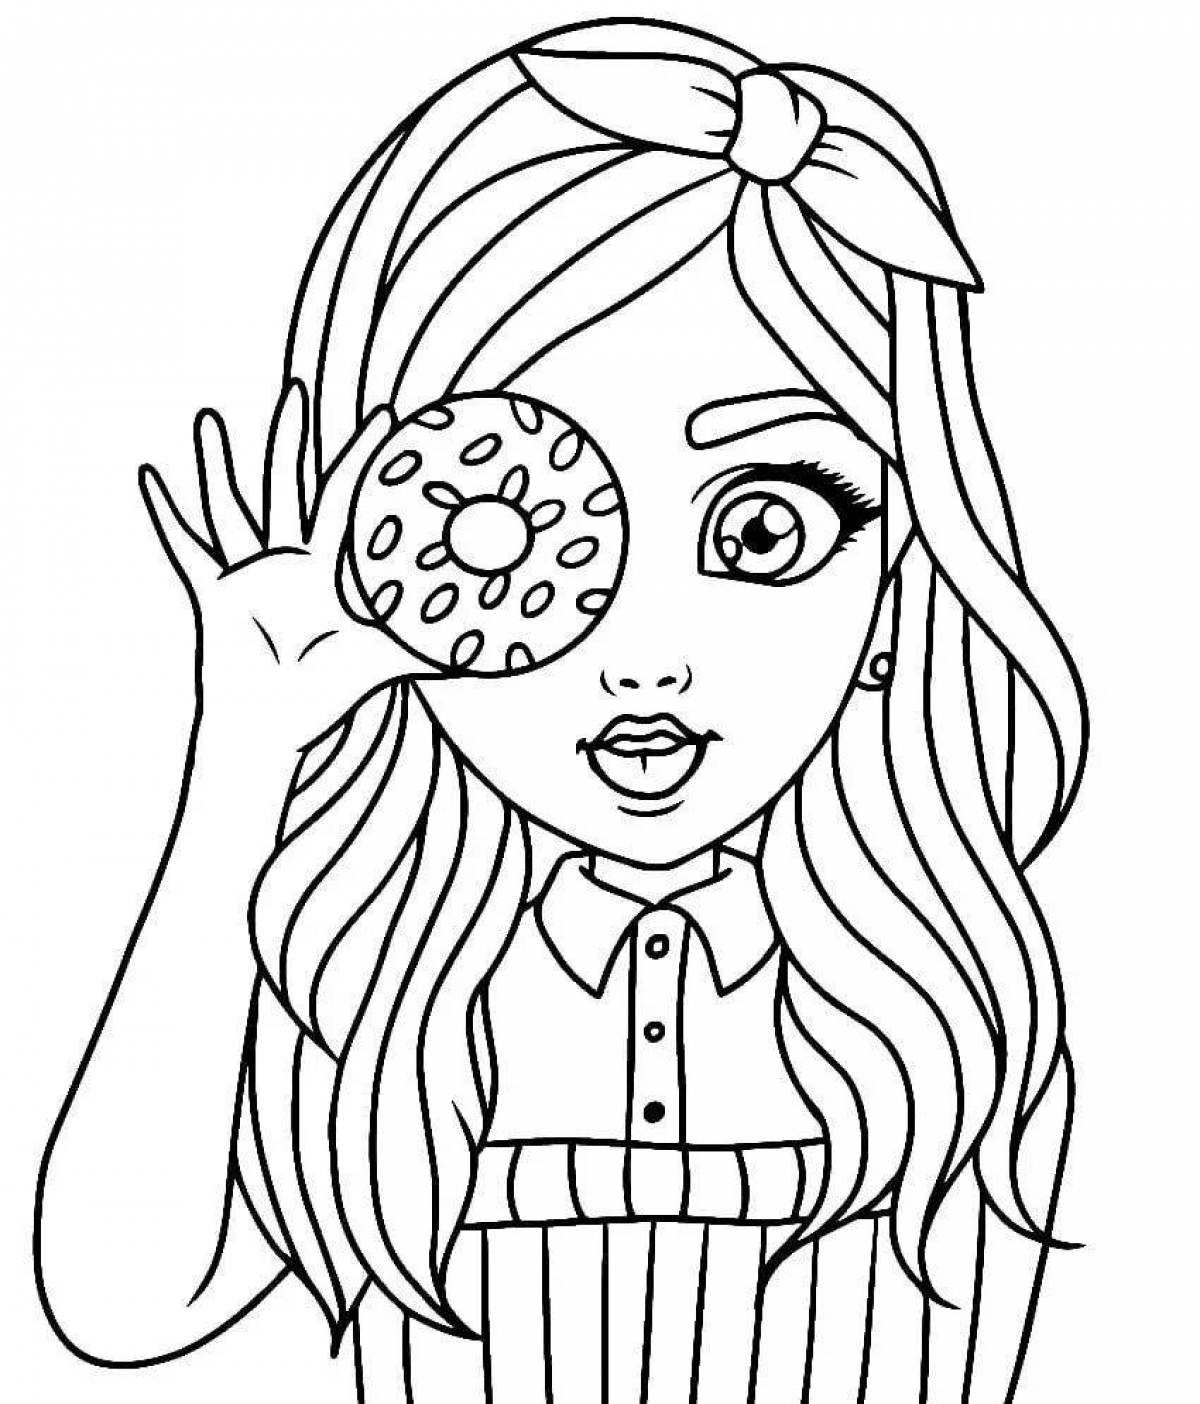 Adorable coloring book for girls 14 years old